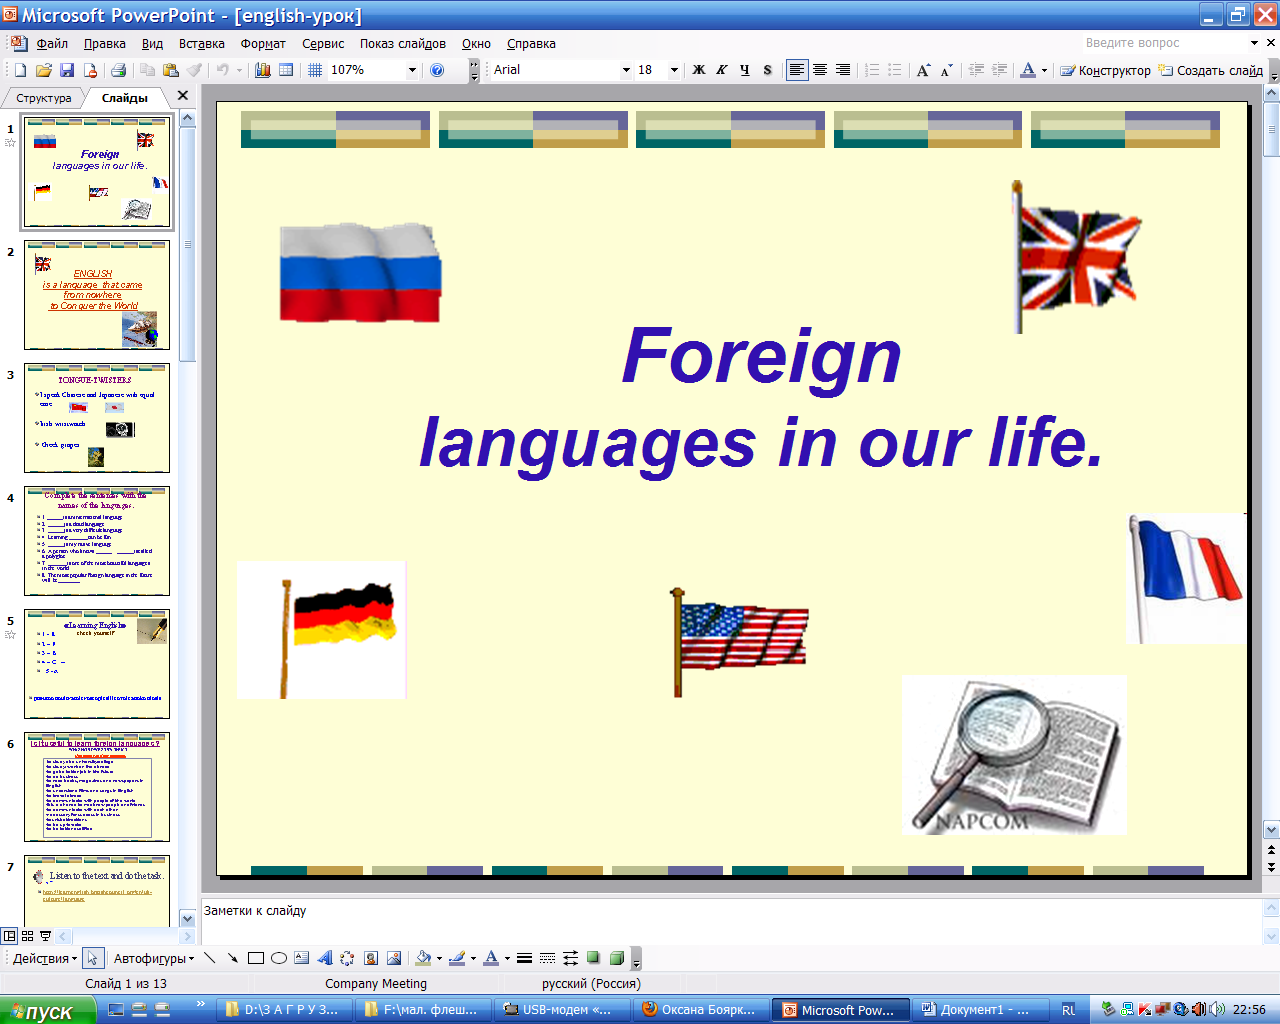 Конспект урока FOREIGN LANGUAGES IN OUR LIFE